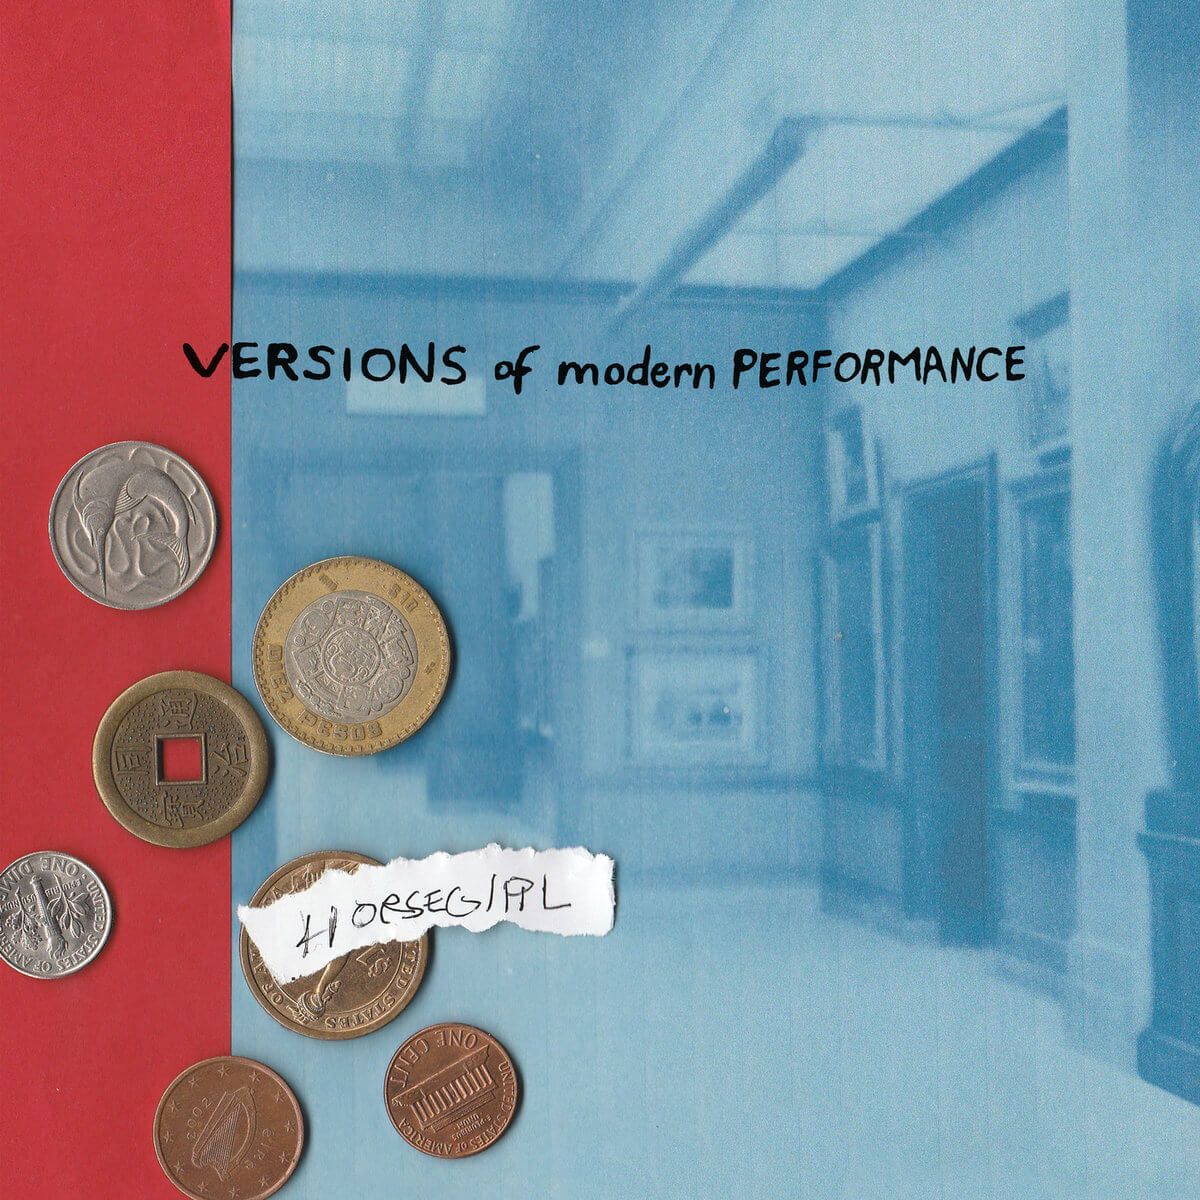 Versions of Modern Performance by Horsegirl Album review by Paul Brown